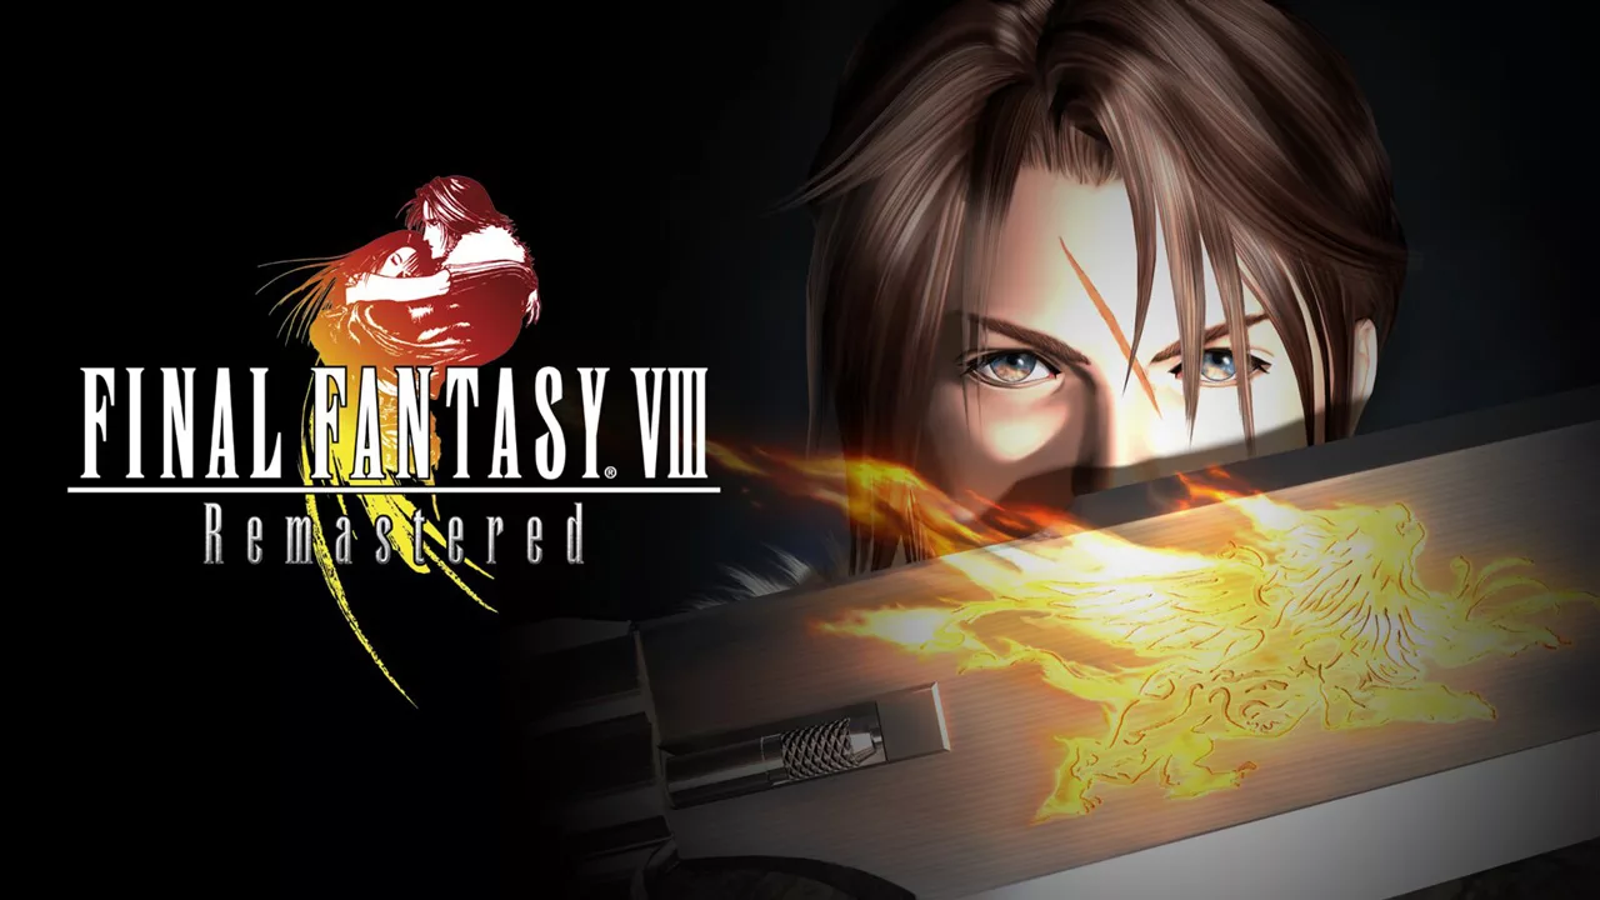 Final Fantasy 8 is a bizarre masterpiece - and playing the remaster reminds  it'd make just as good a remake as FF7